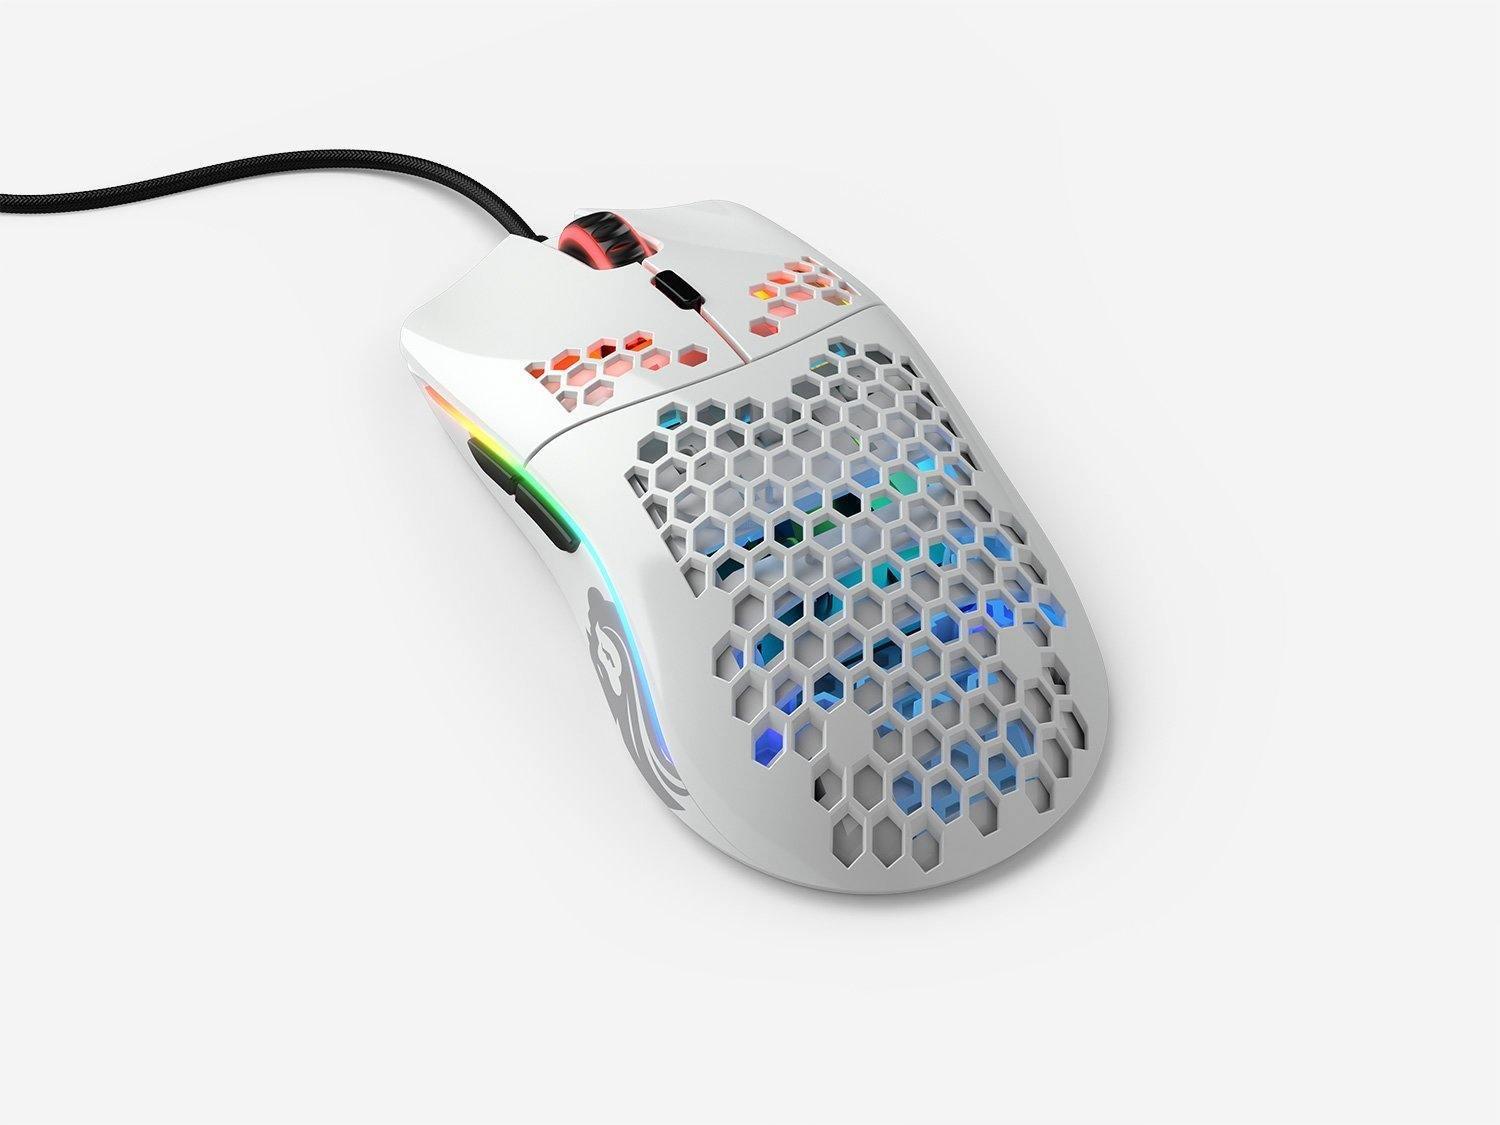 Glorious Gaming Mouse Model O - Glossy White